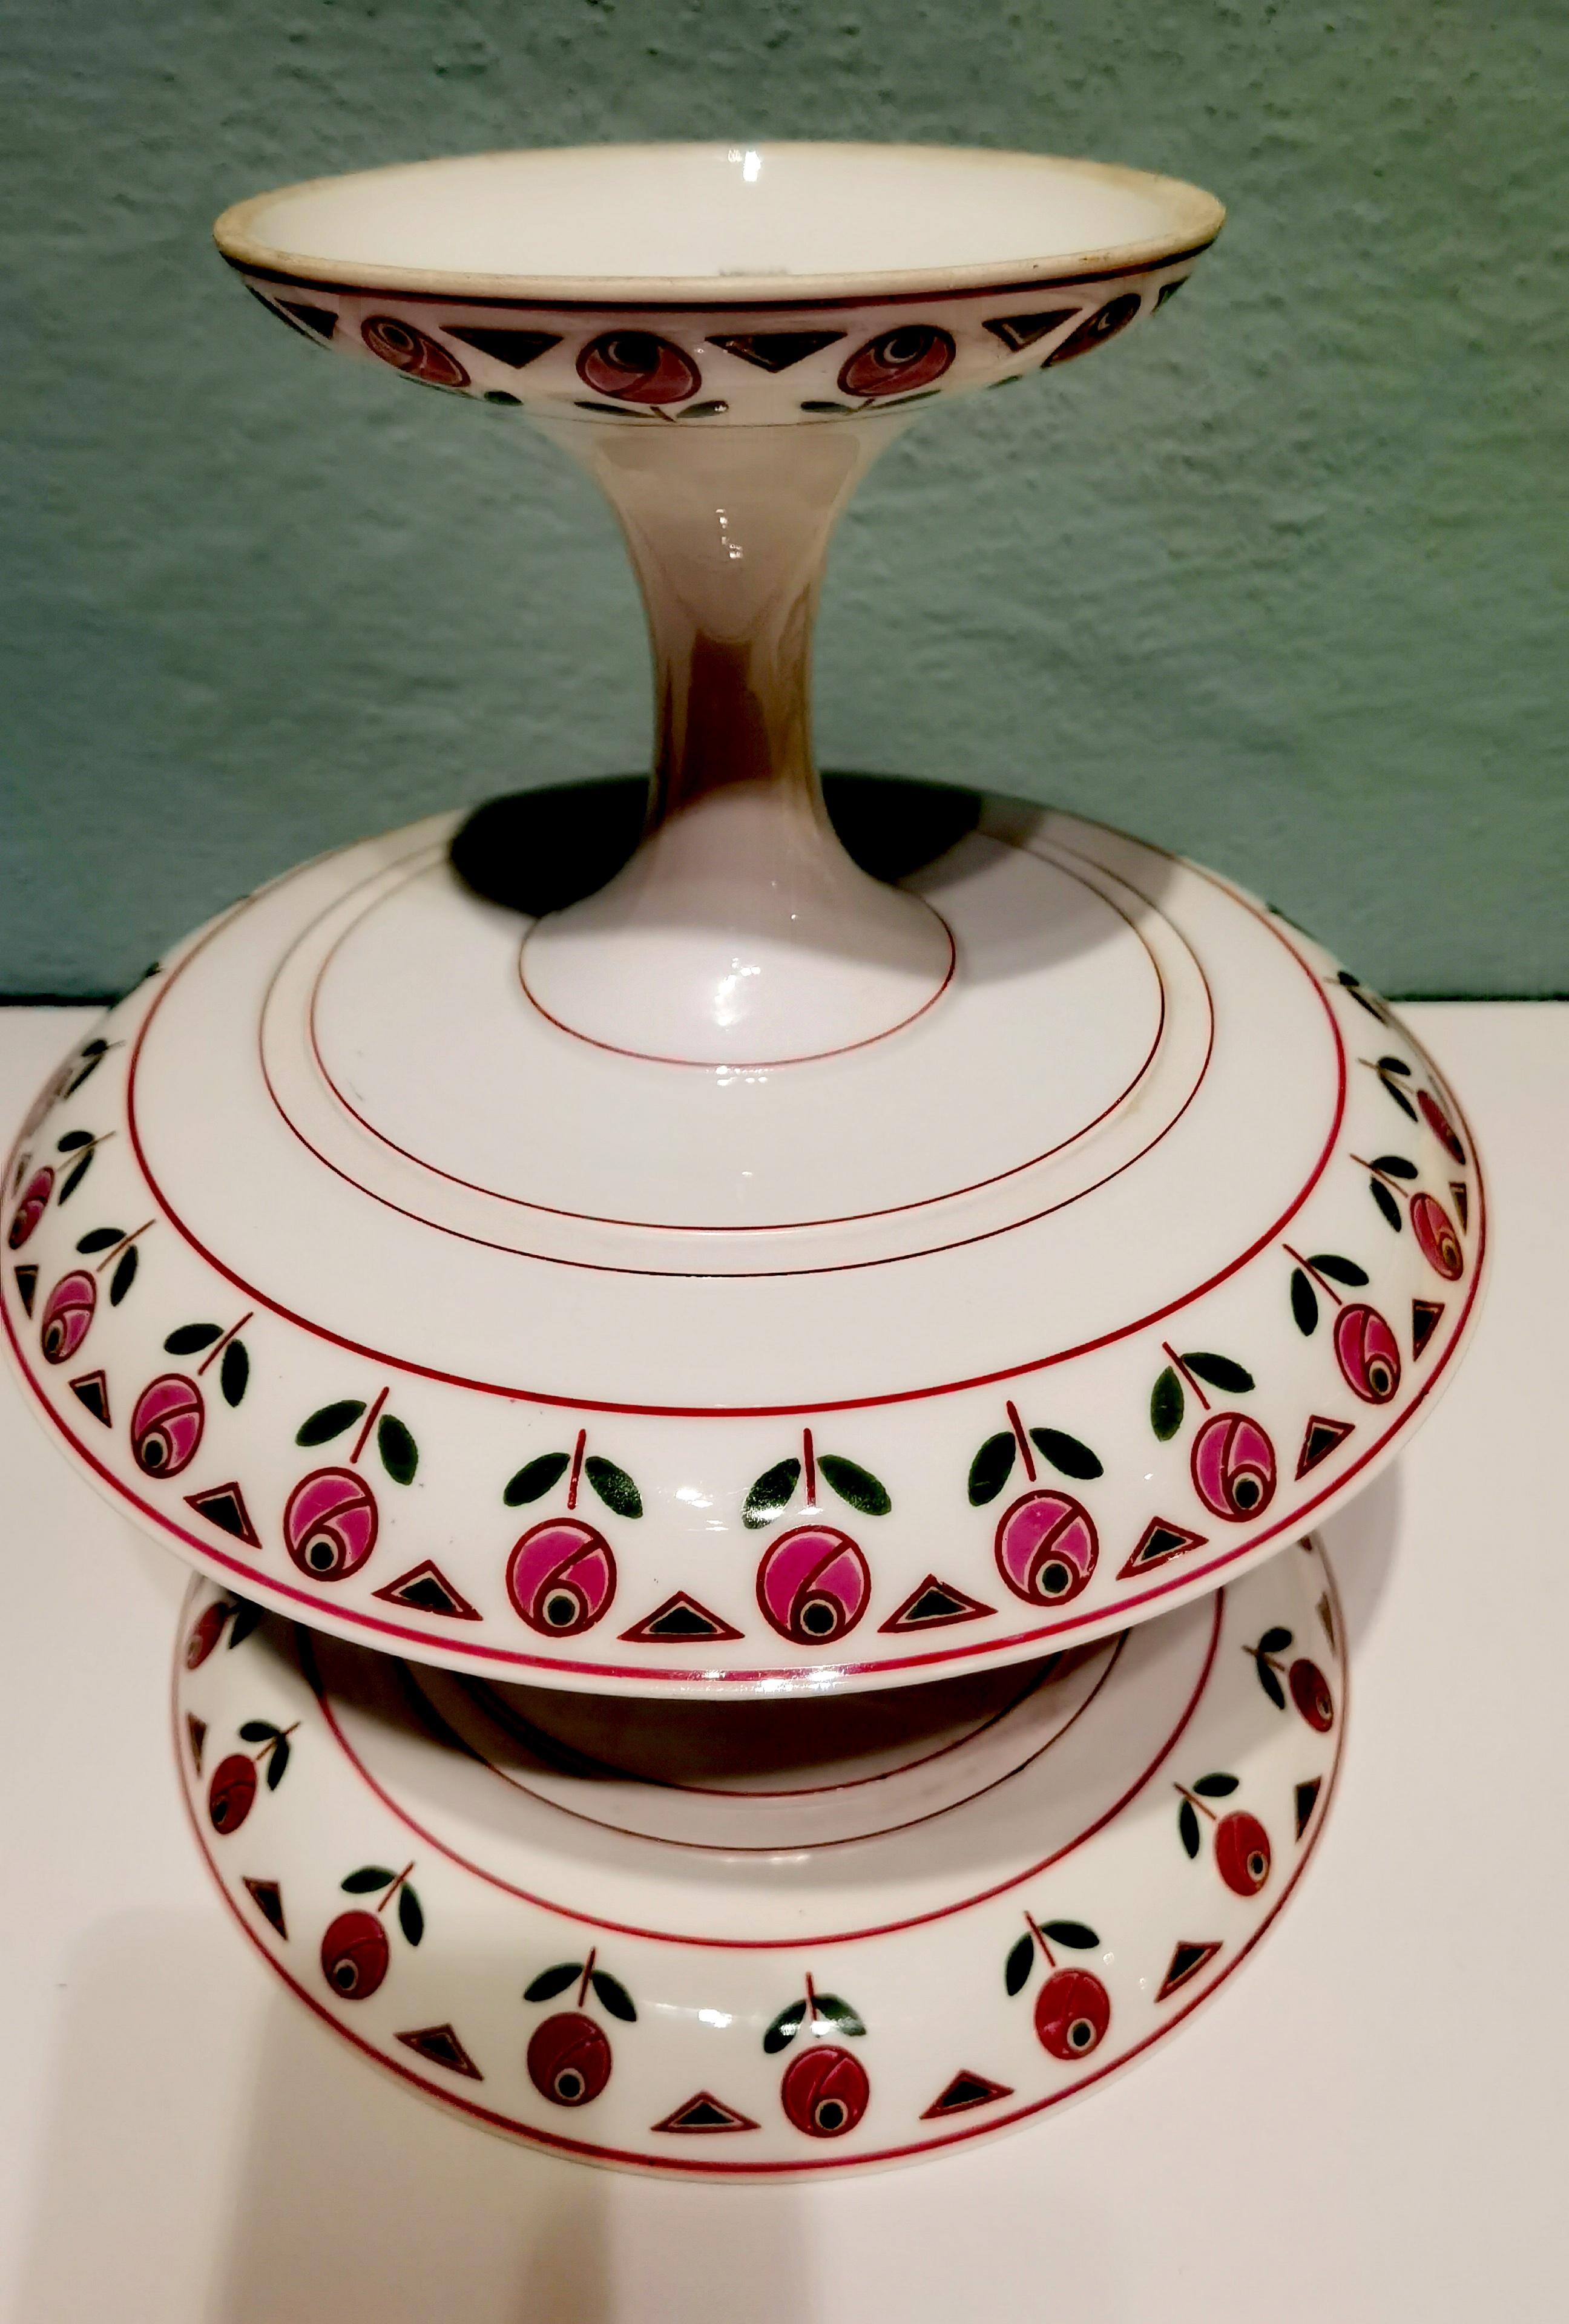 Pair of Art Deco porcelain fruit stands in slightly different seizes. Hand-painted in green and pink colors with a rim of roses. Also backside painted. 1 stand stamped Limoges France, 1 stand stamped A. Anternier & Co Limoges Limoges